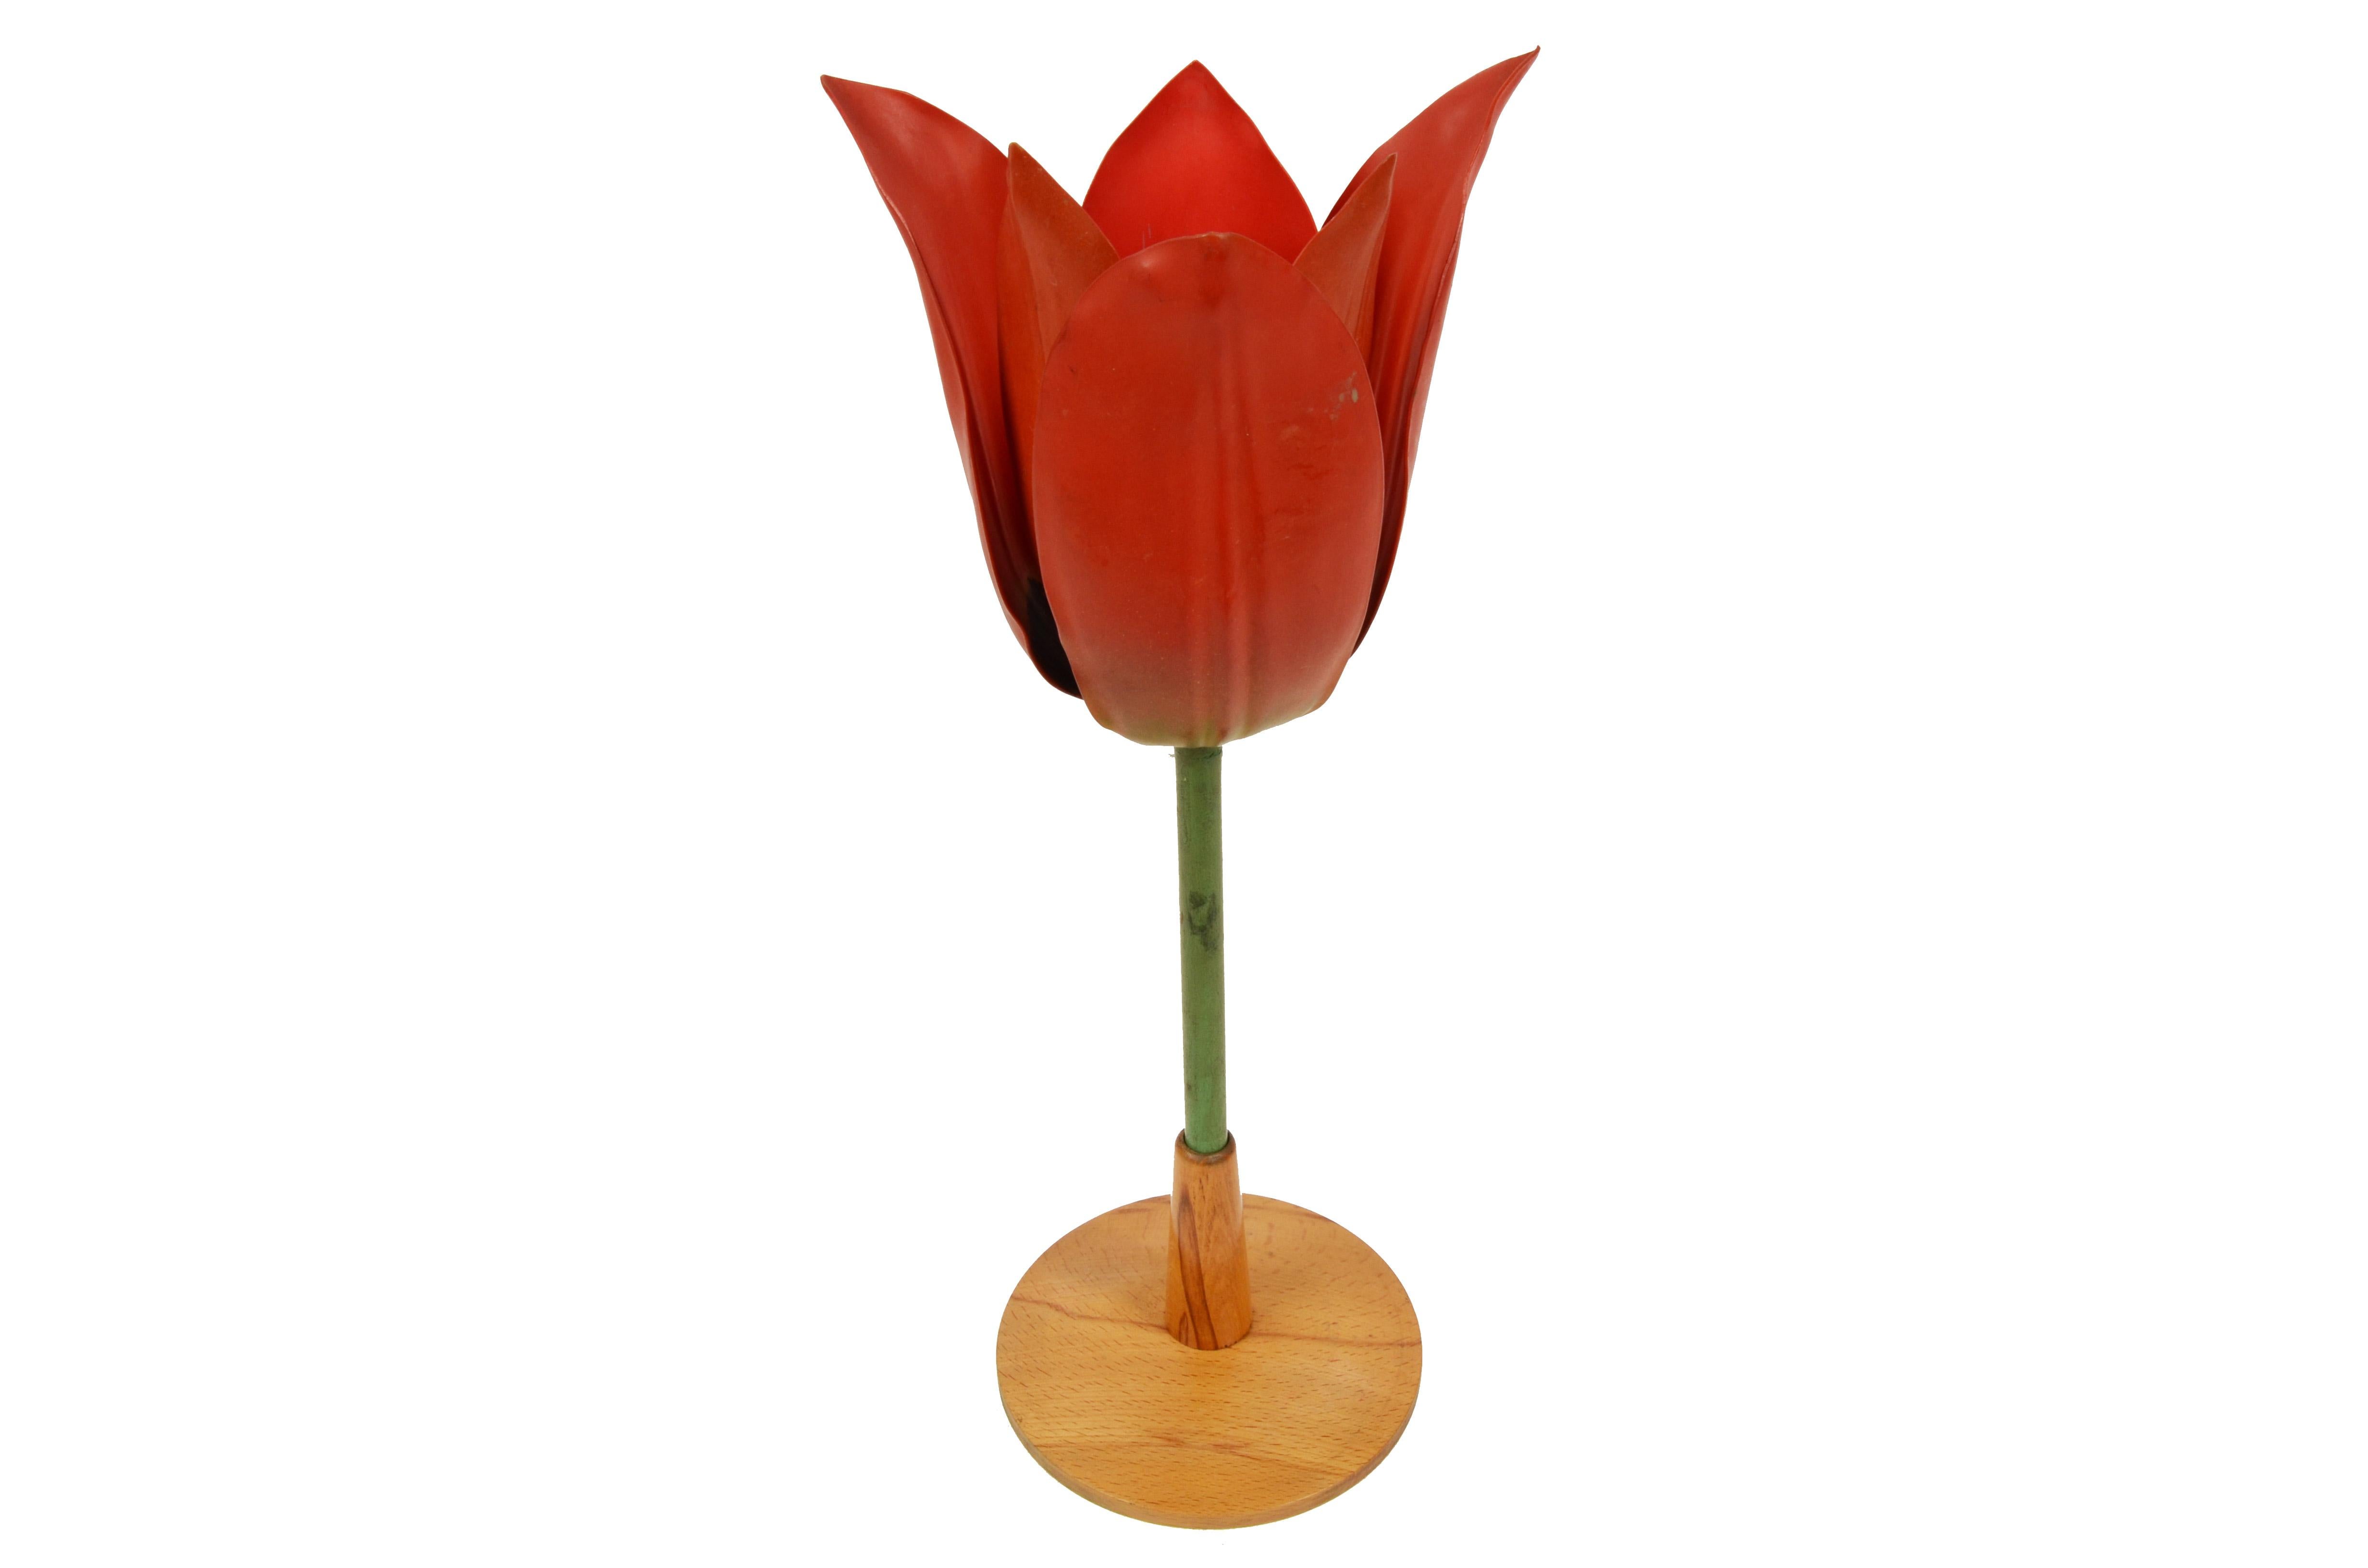 20th Century 1950s Enlarged Didactic German Botanic Model Depicting a Poppy Flower